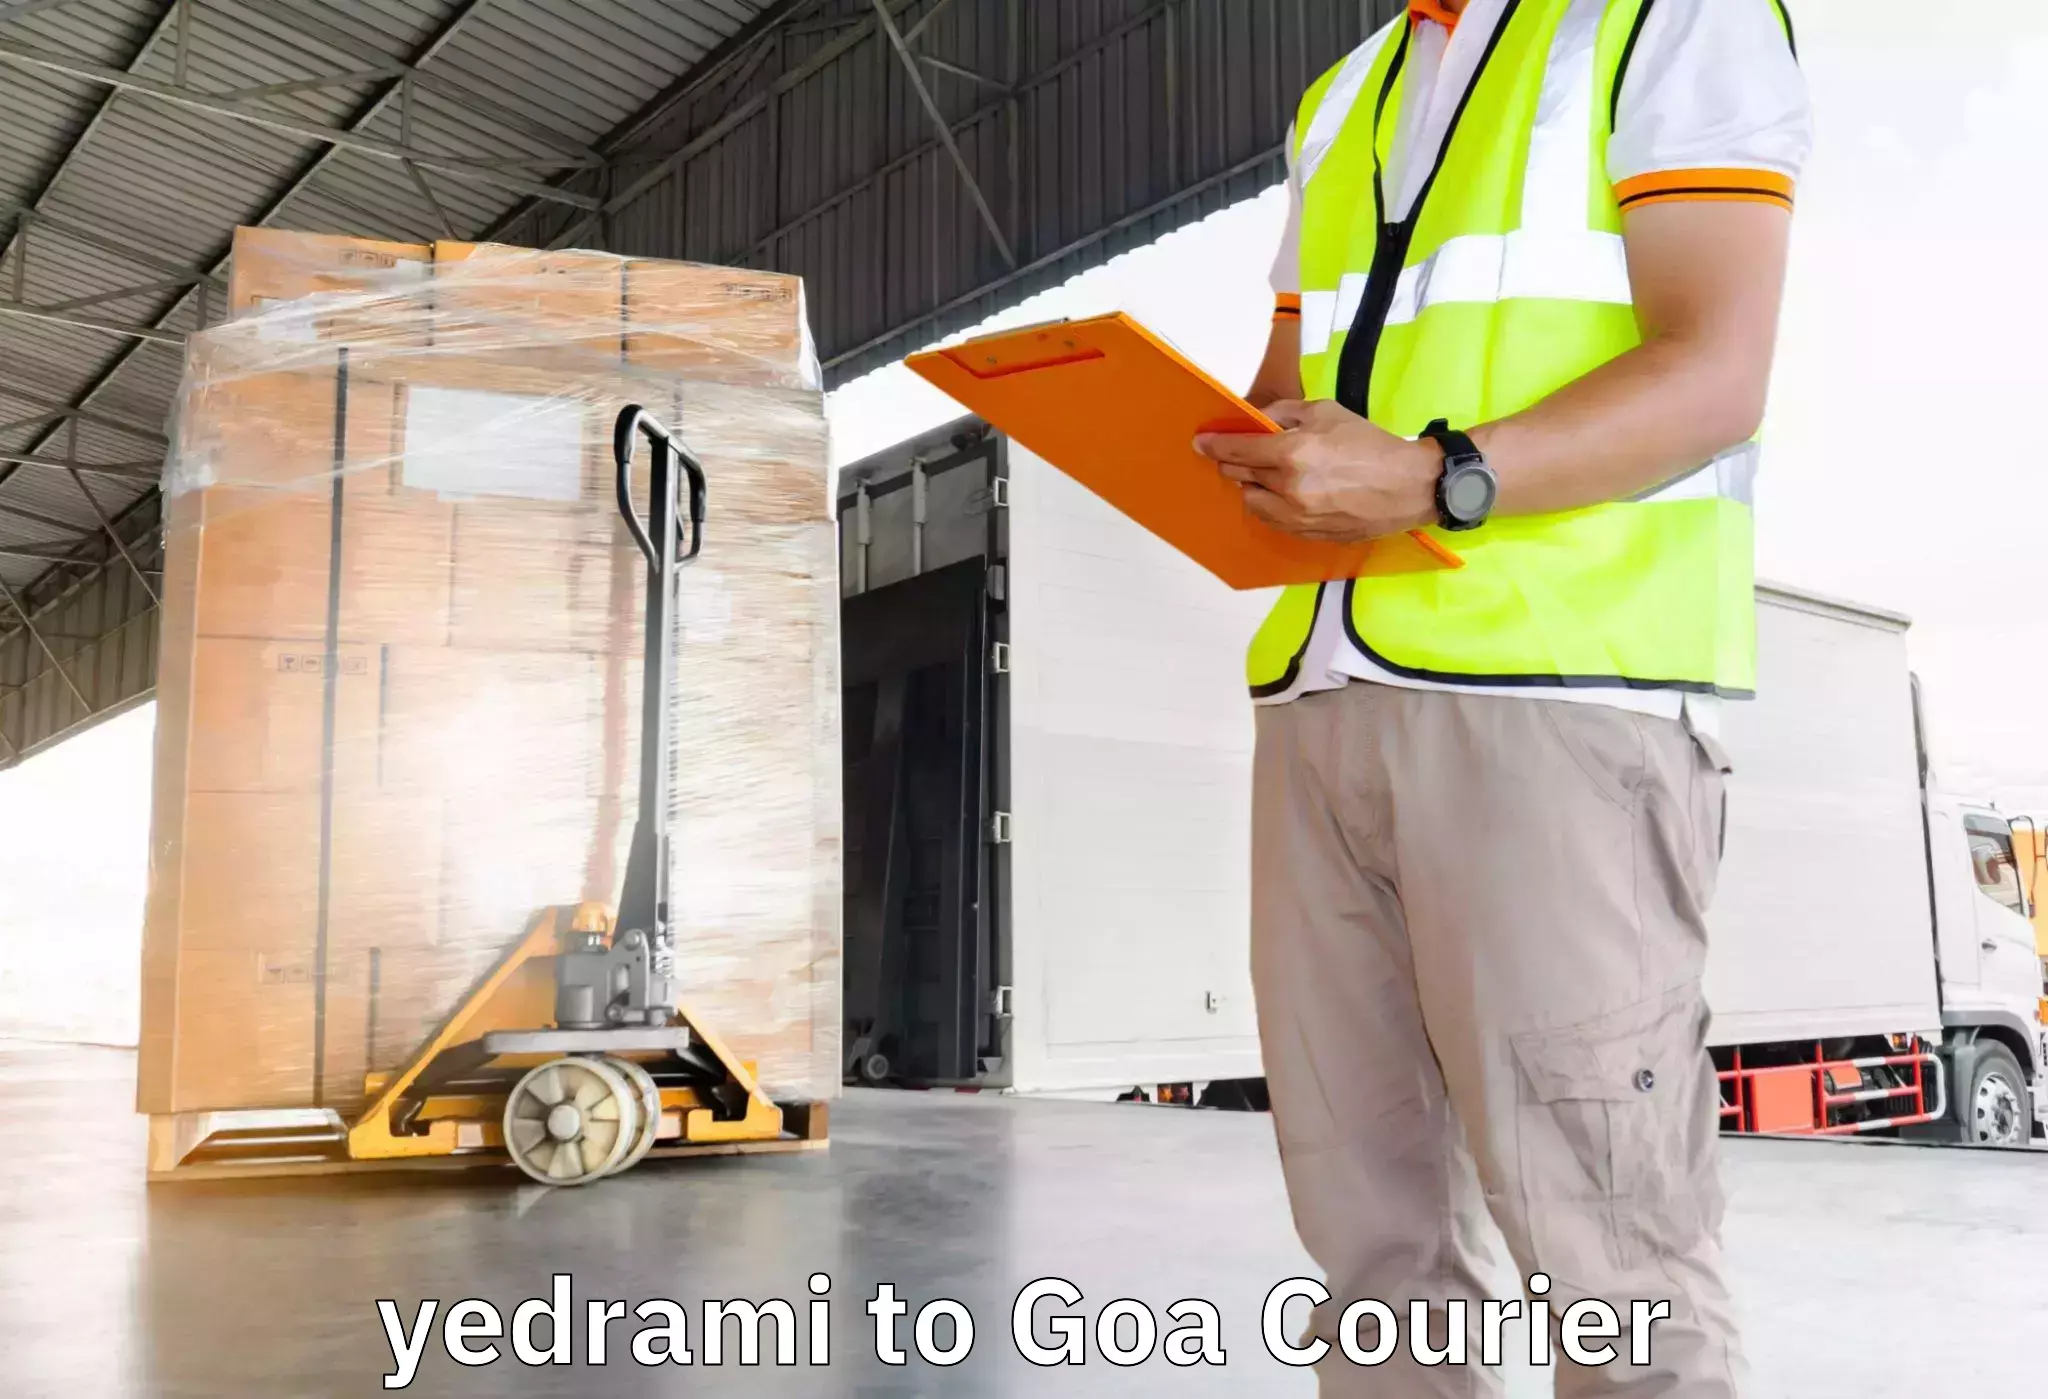 Affordable relocation services yedrami to Goa